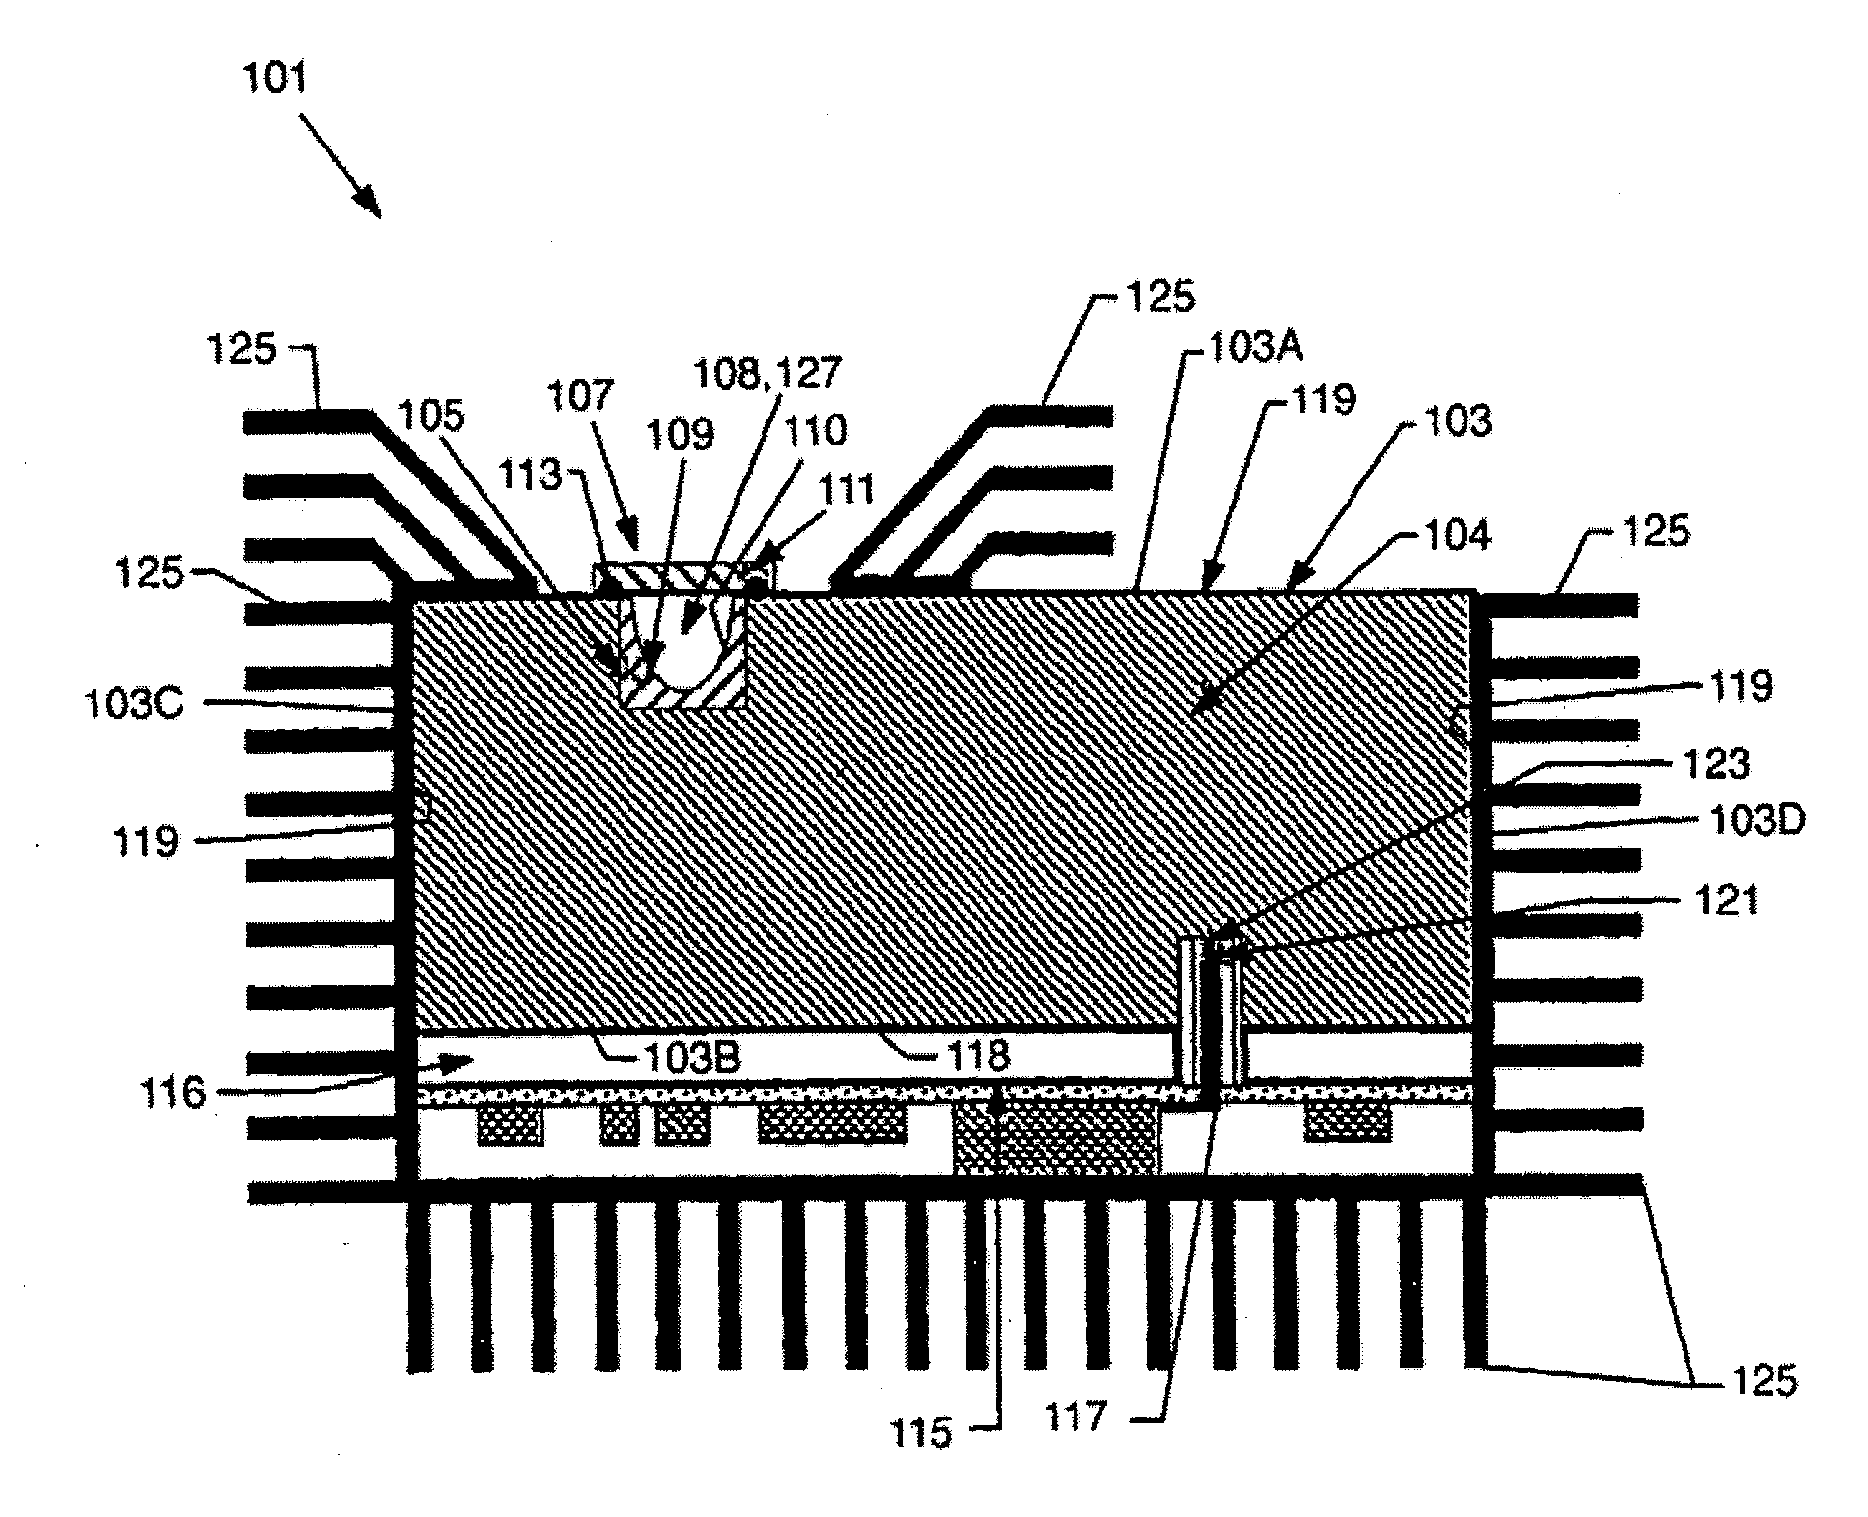 Plasma Lamp with Dielectric Waveguide Body Having Shaped Configuration